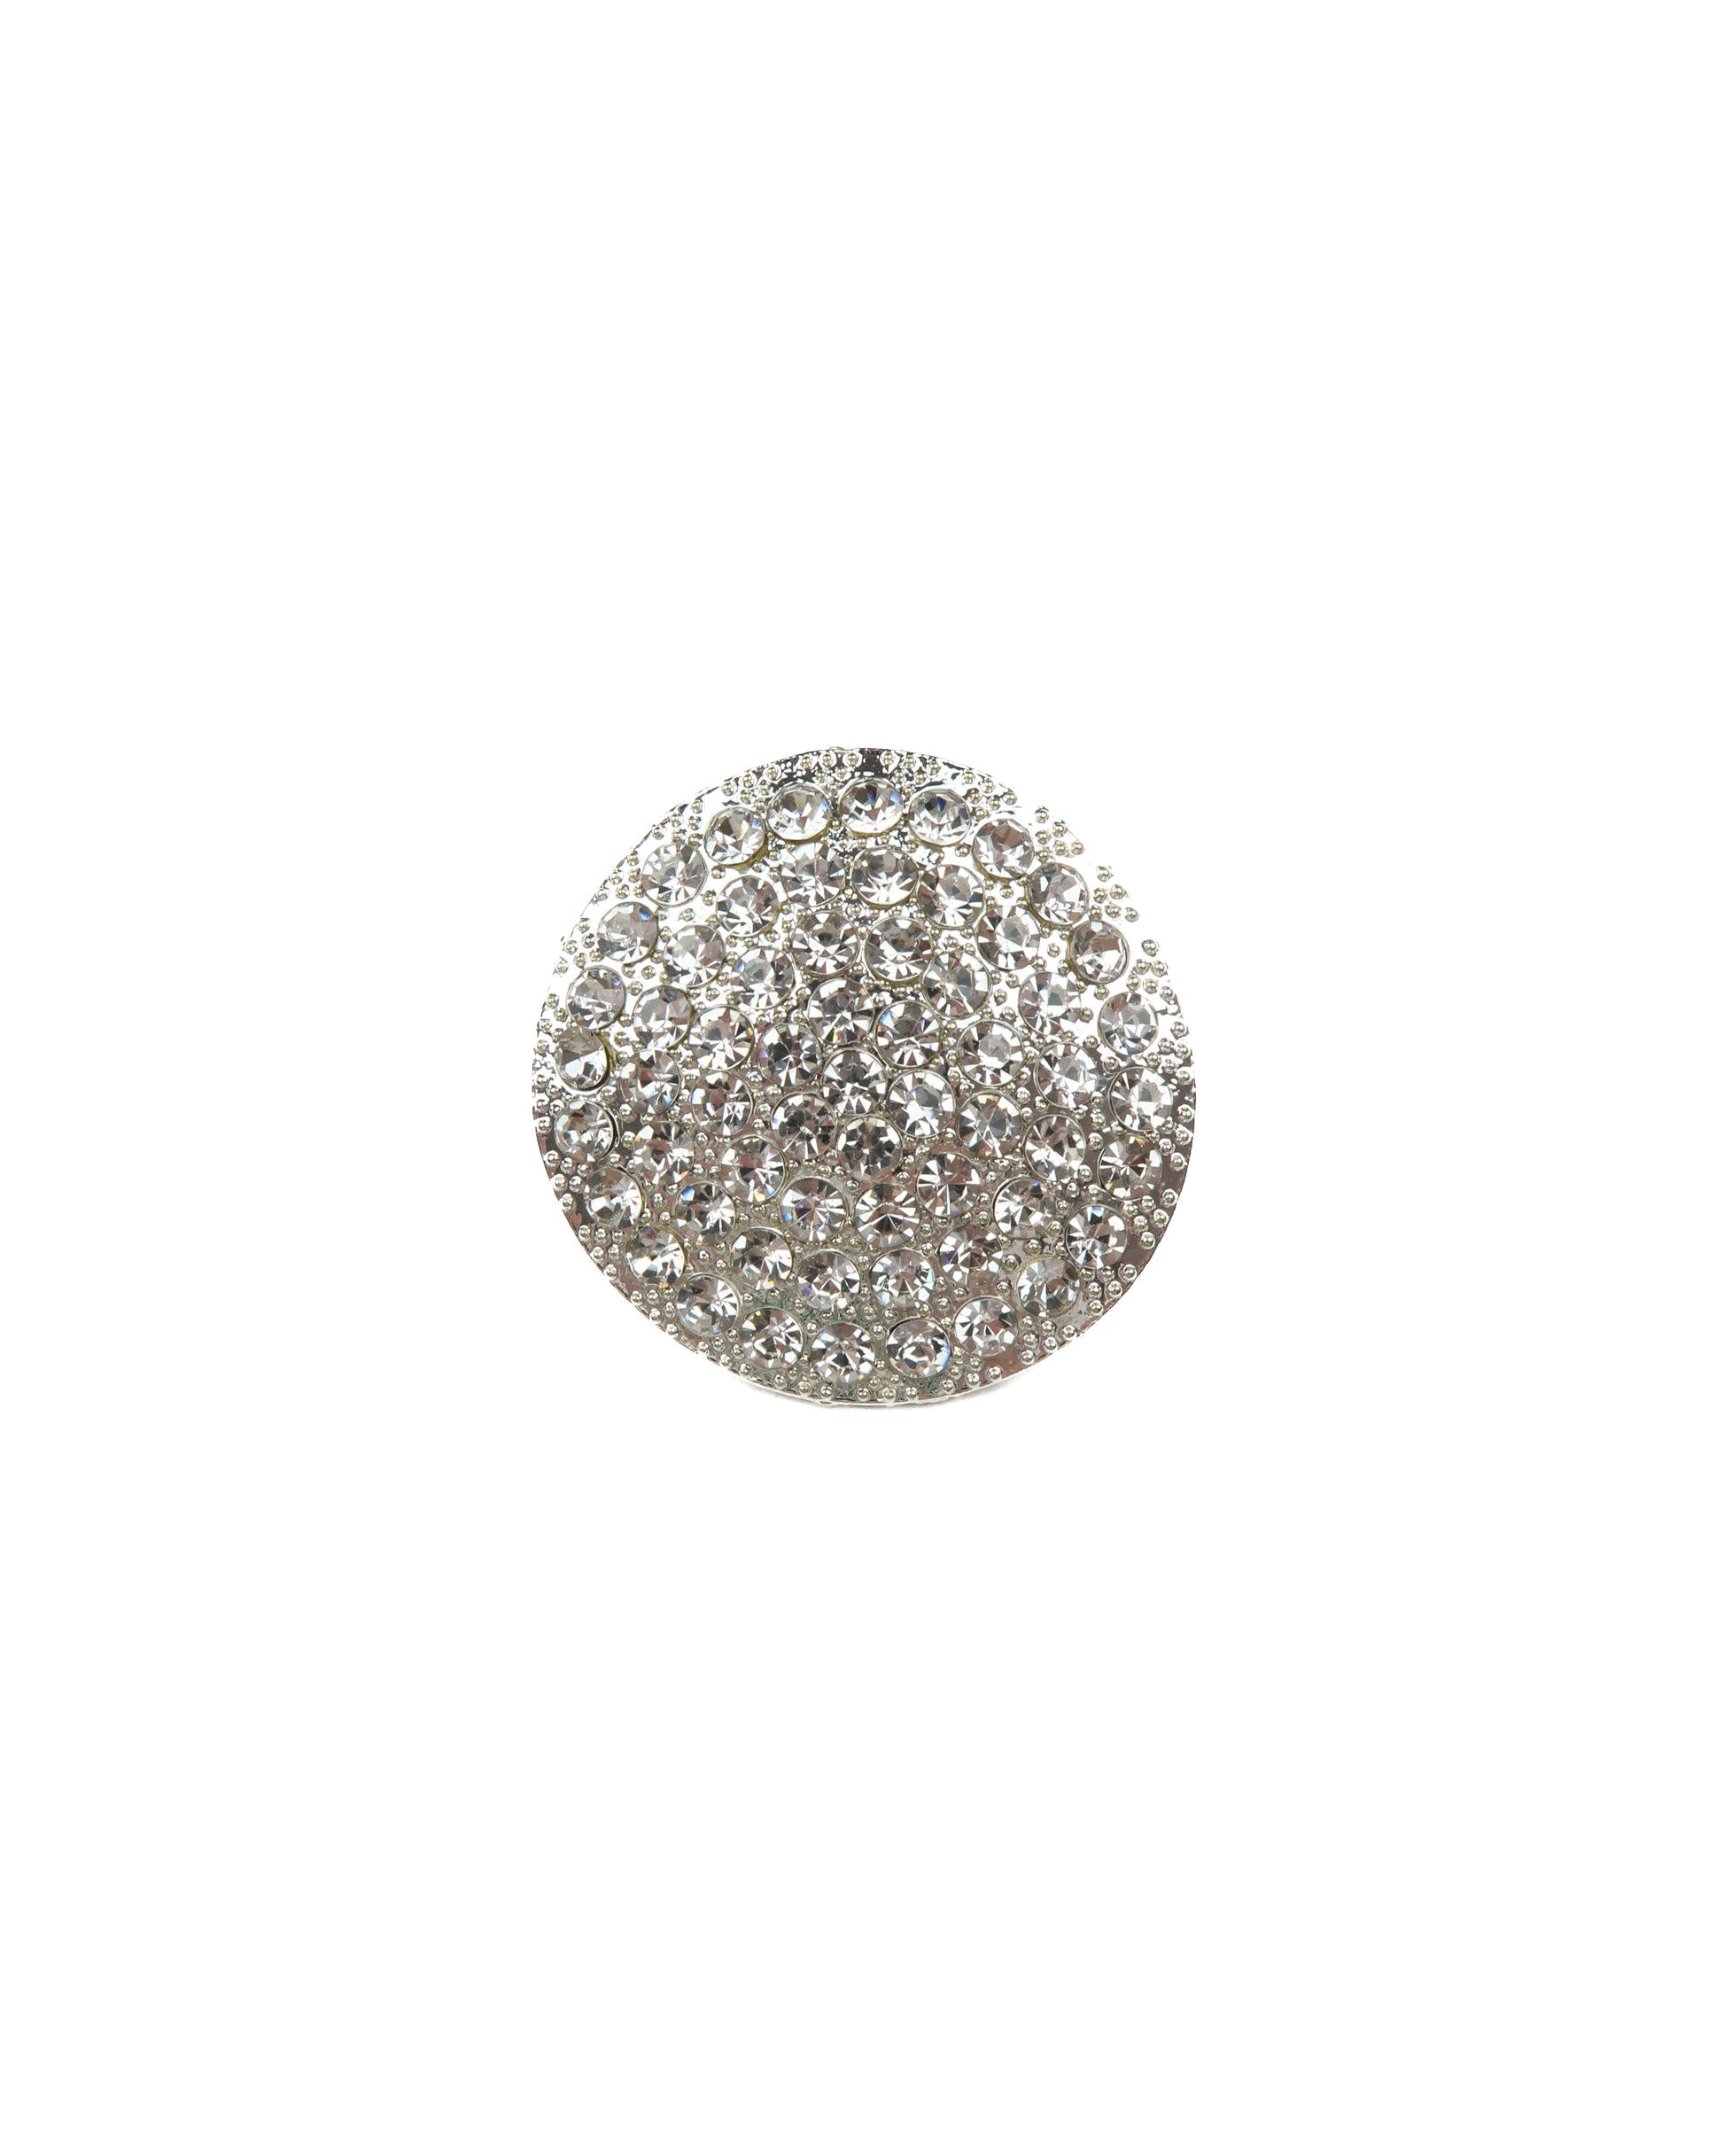 Shiny silver rhinestone button on a clean white surface.